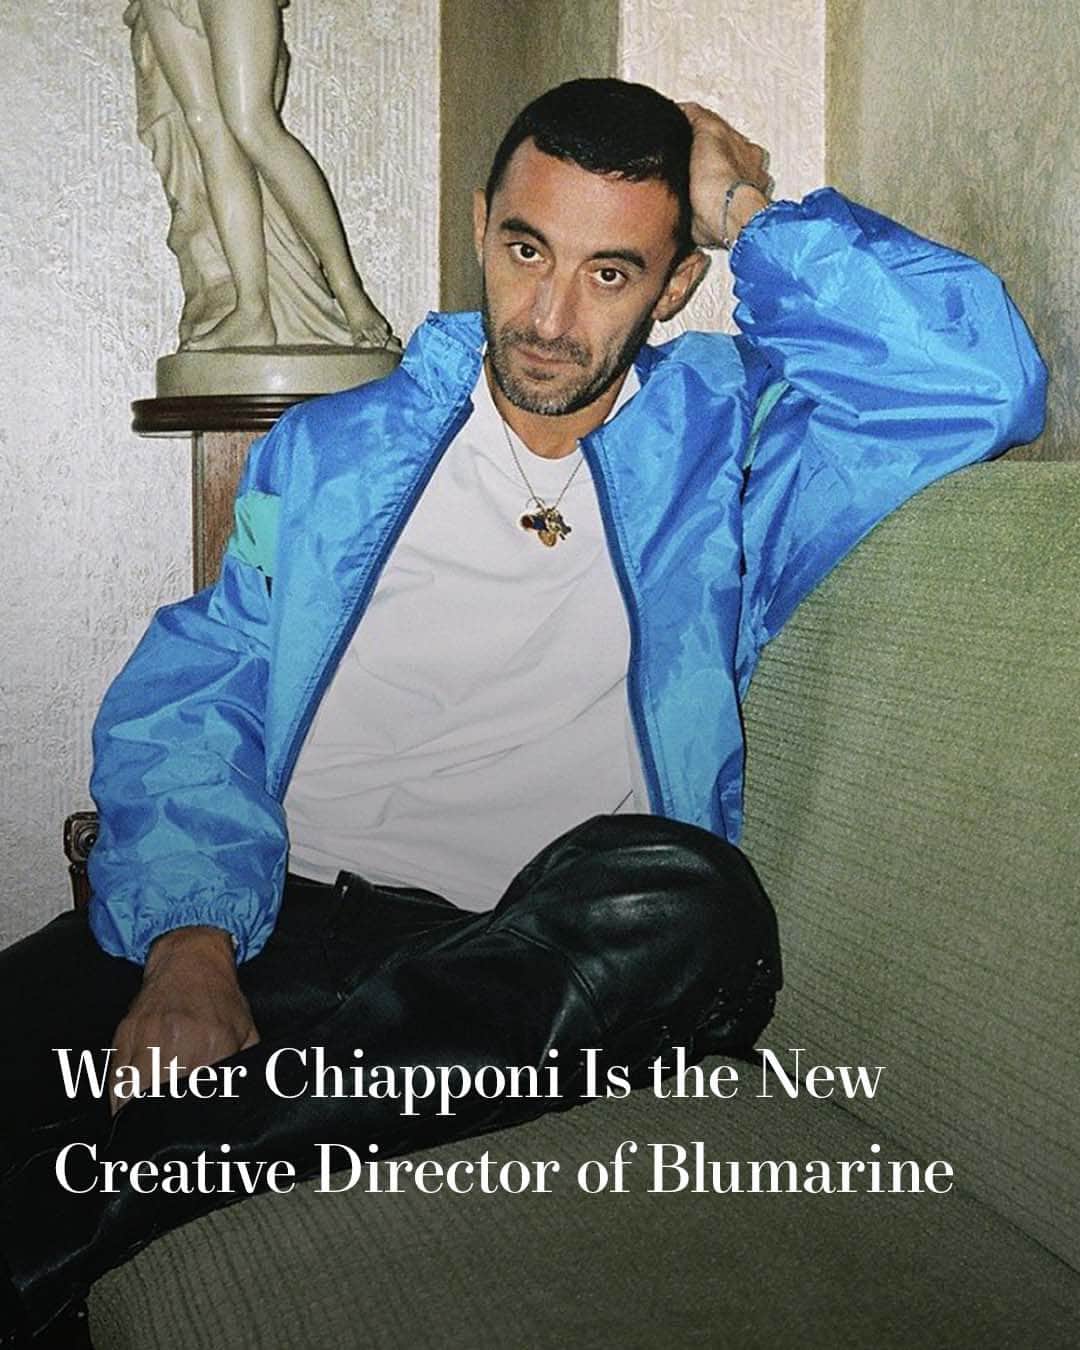 Harper's BAZAARのインスタグラム：「This morning, @blumarine announced the appointment of designer @walterchiapponi as Creative Director, replacing Nicola Brognano who left the position in October. The news comes just two months after Chiapponi’s departure from Tod’s.  Chiapponi, who has worked previously for brands like Bottega Veneta, Miu Miu, Gucci, and more, will present his first collection for Blumarine during the Fall 2024 season in Milan. What to expect at the link in bio.」